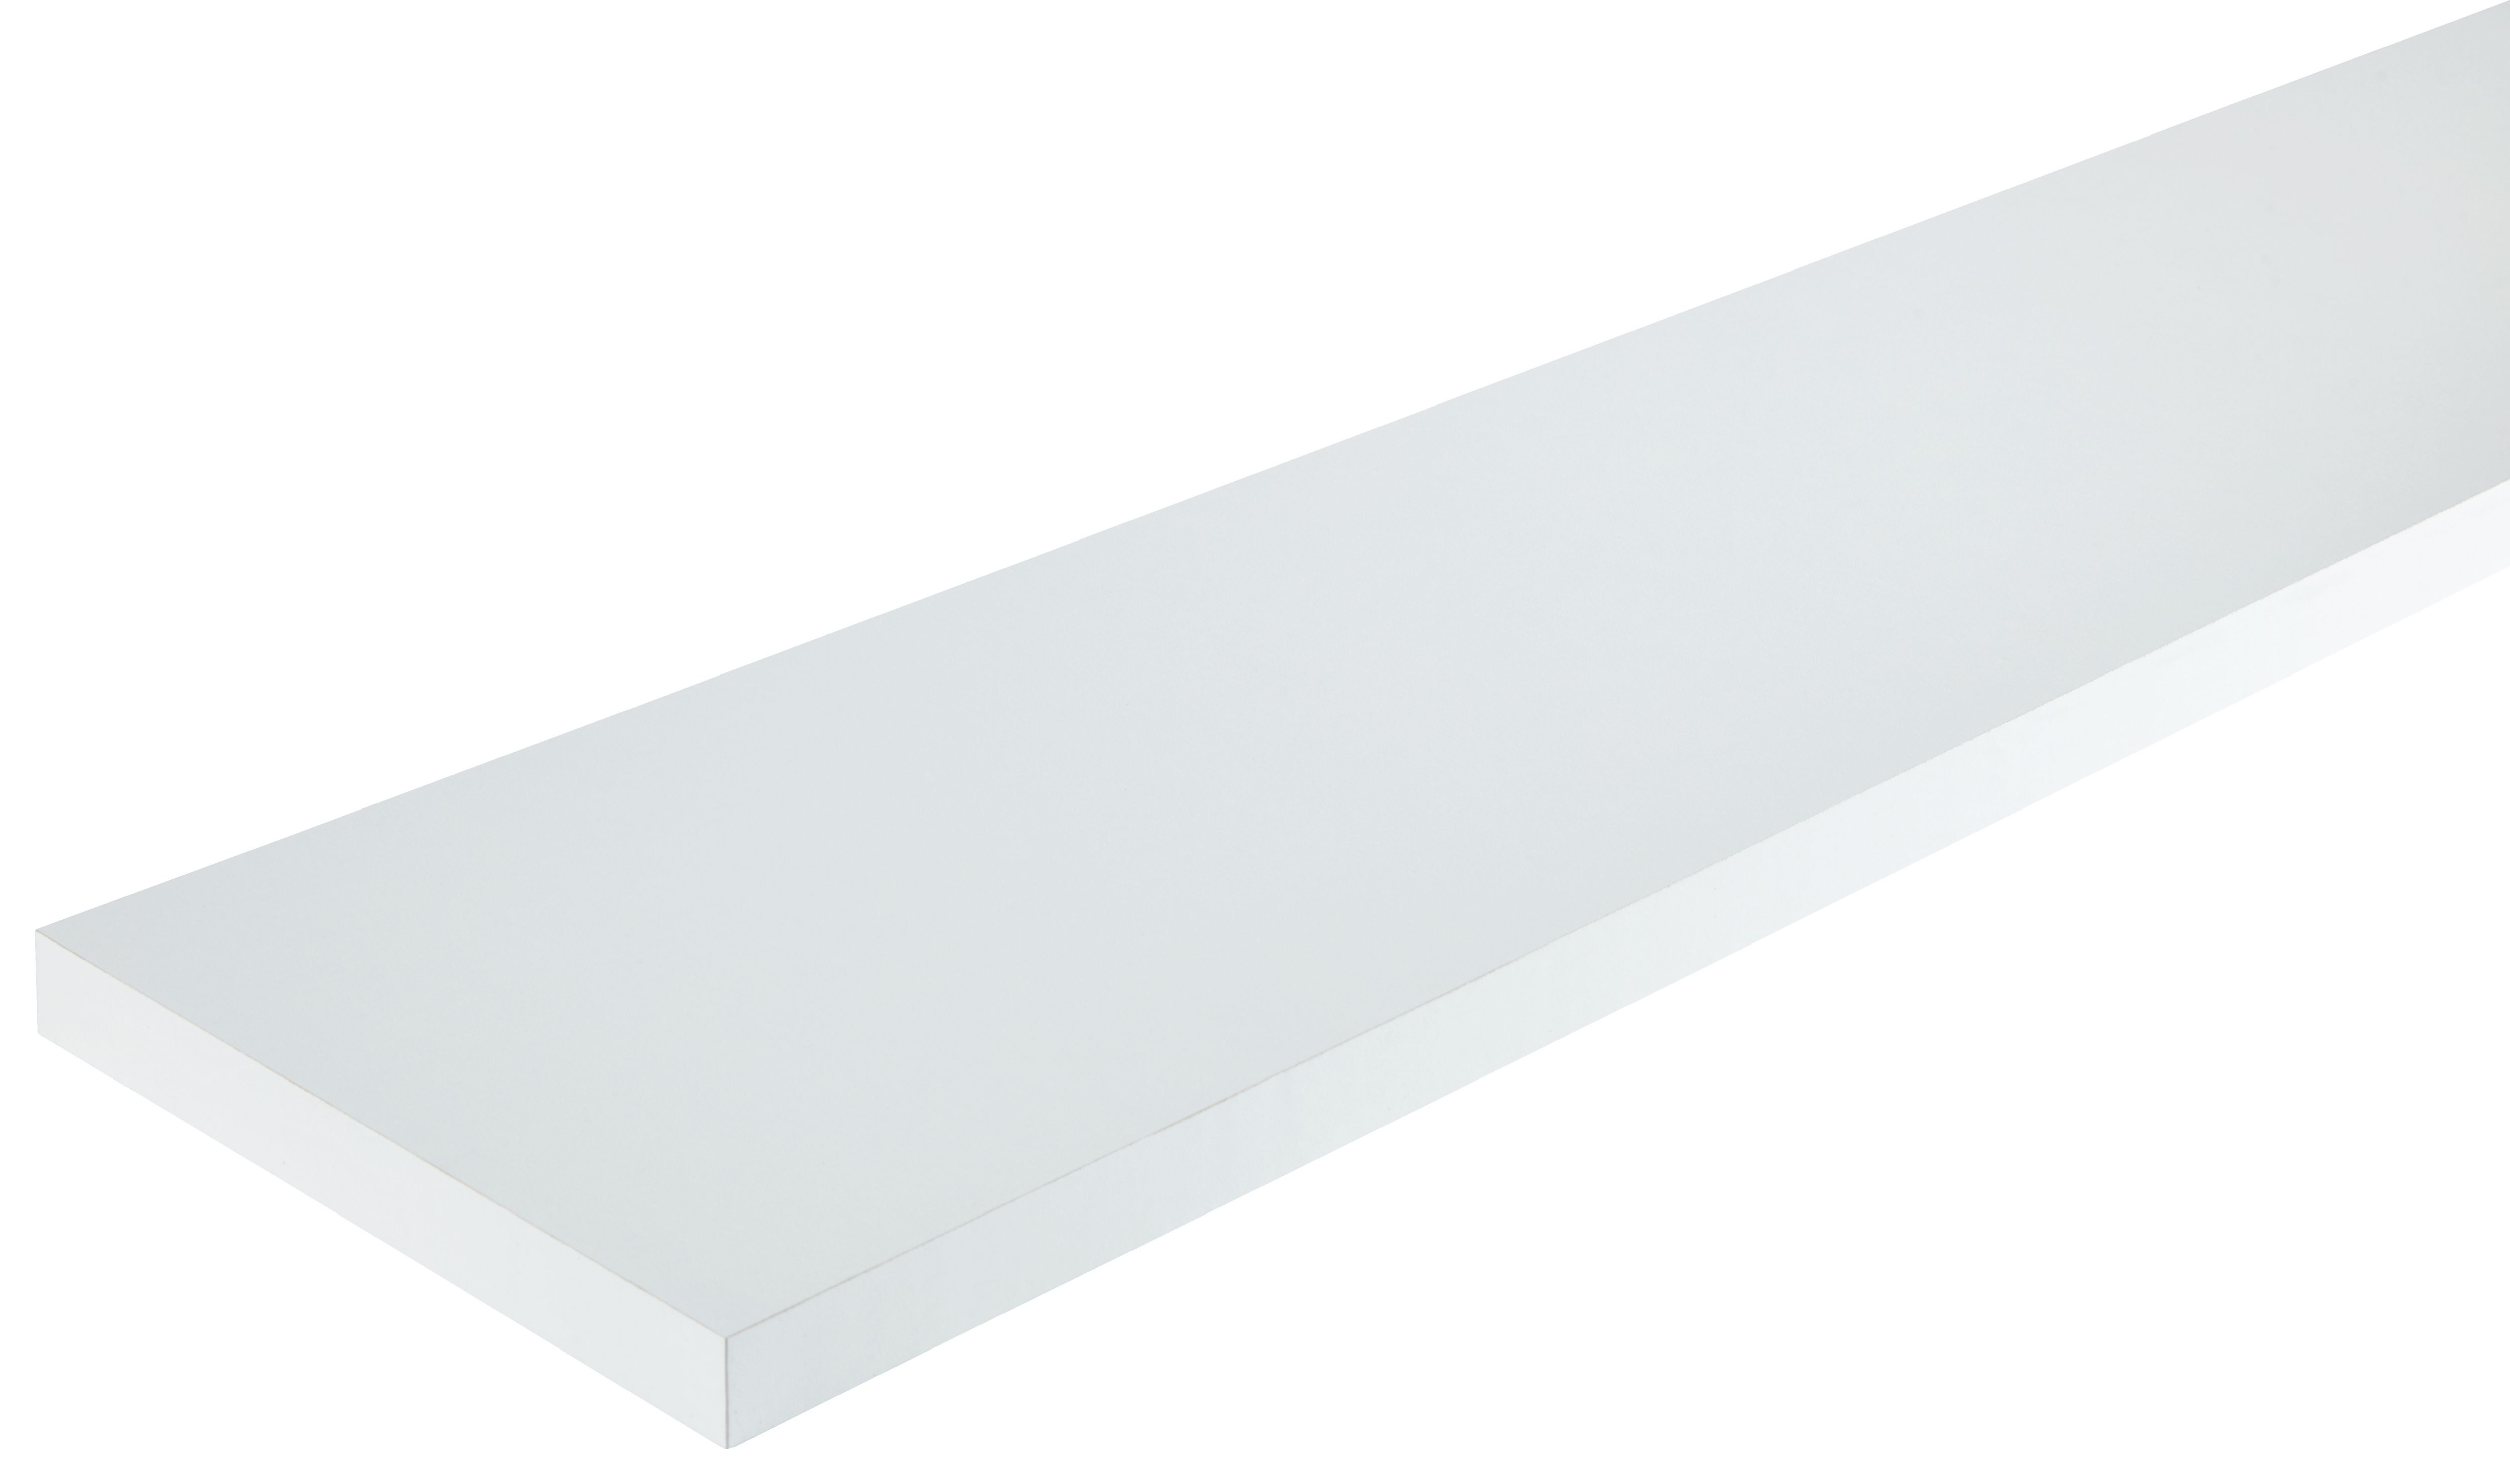 Image of Wickes MFC White Panel - 25 x 600 x 1830mm